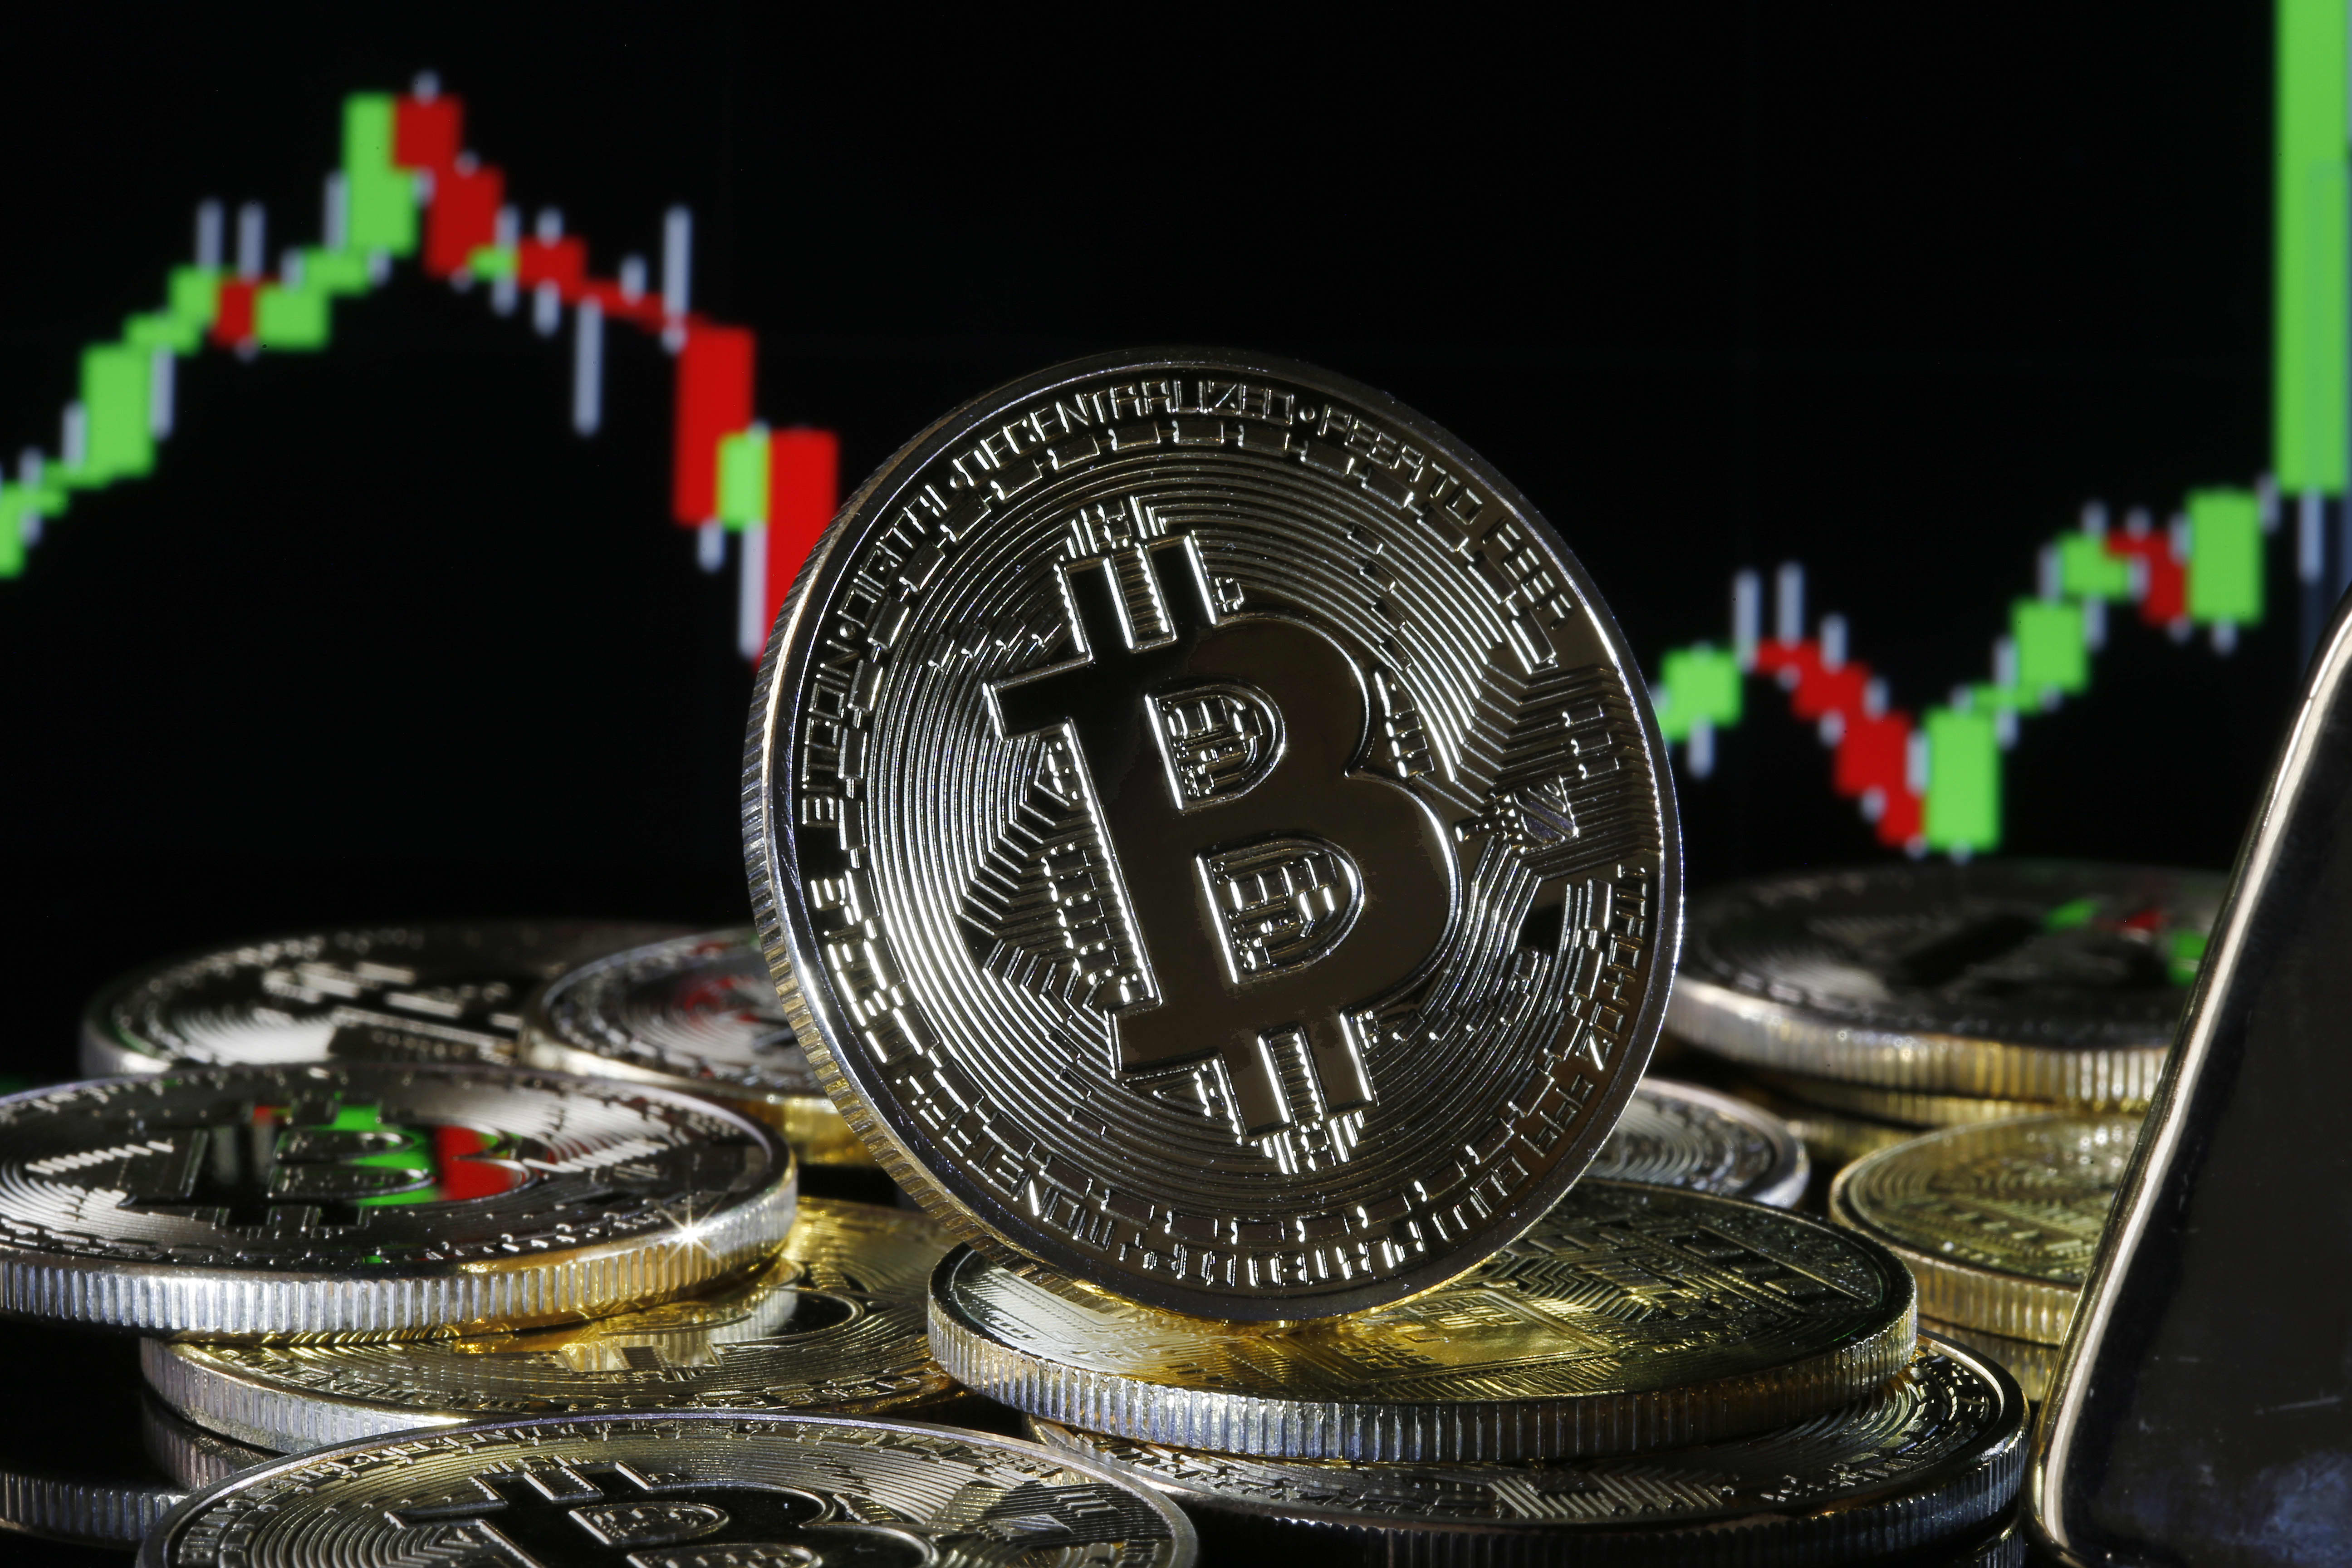 Bitcoin tops $1 trillion in value again as the cryptocurrency's price jumps